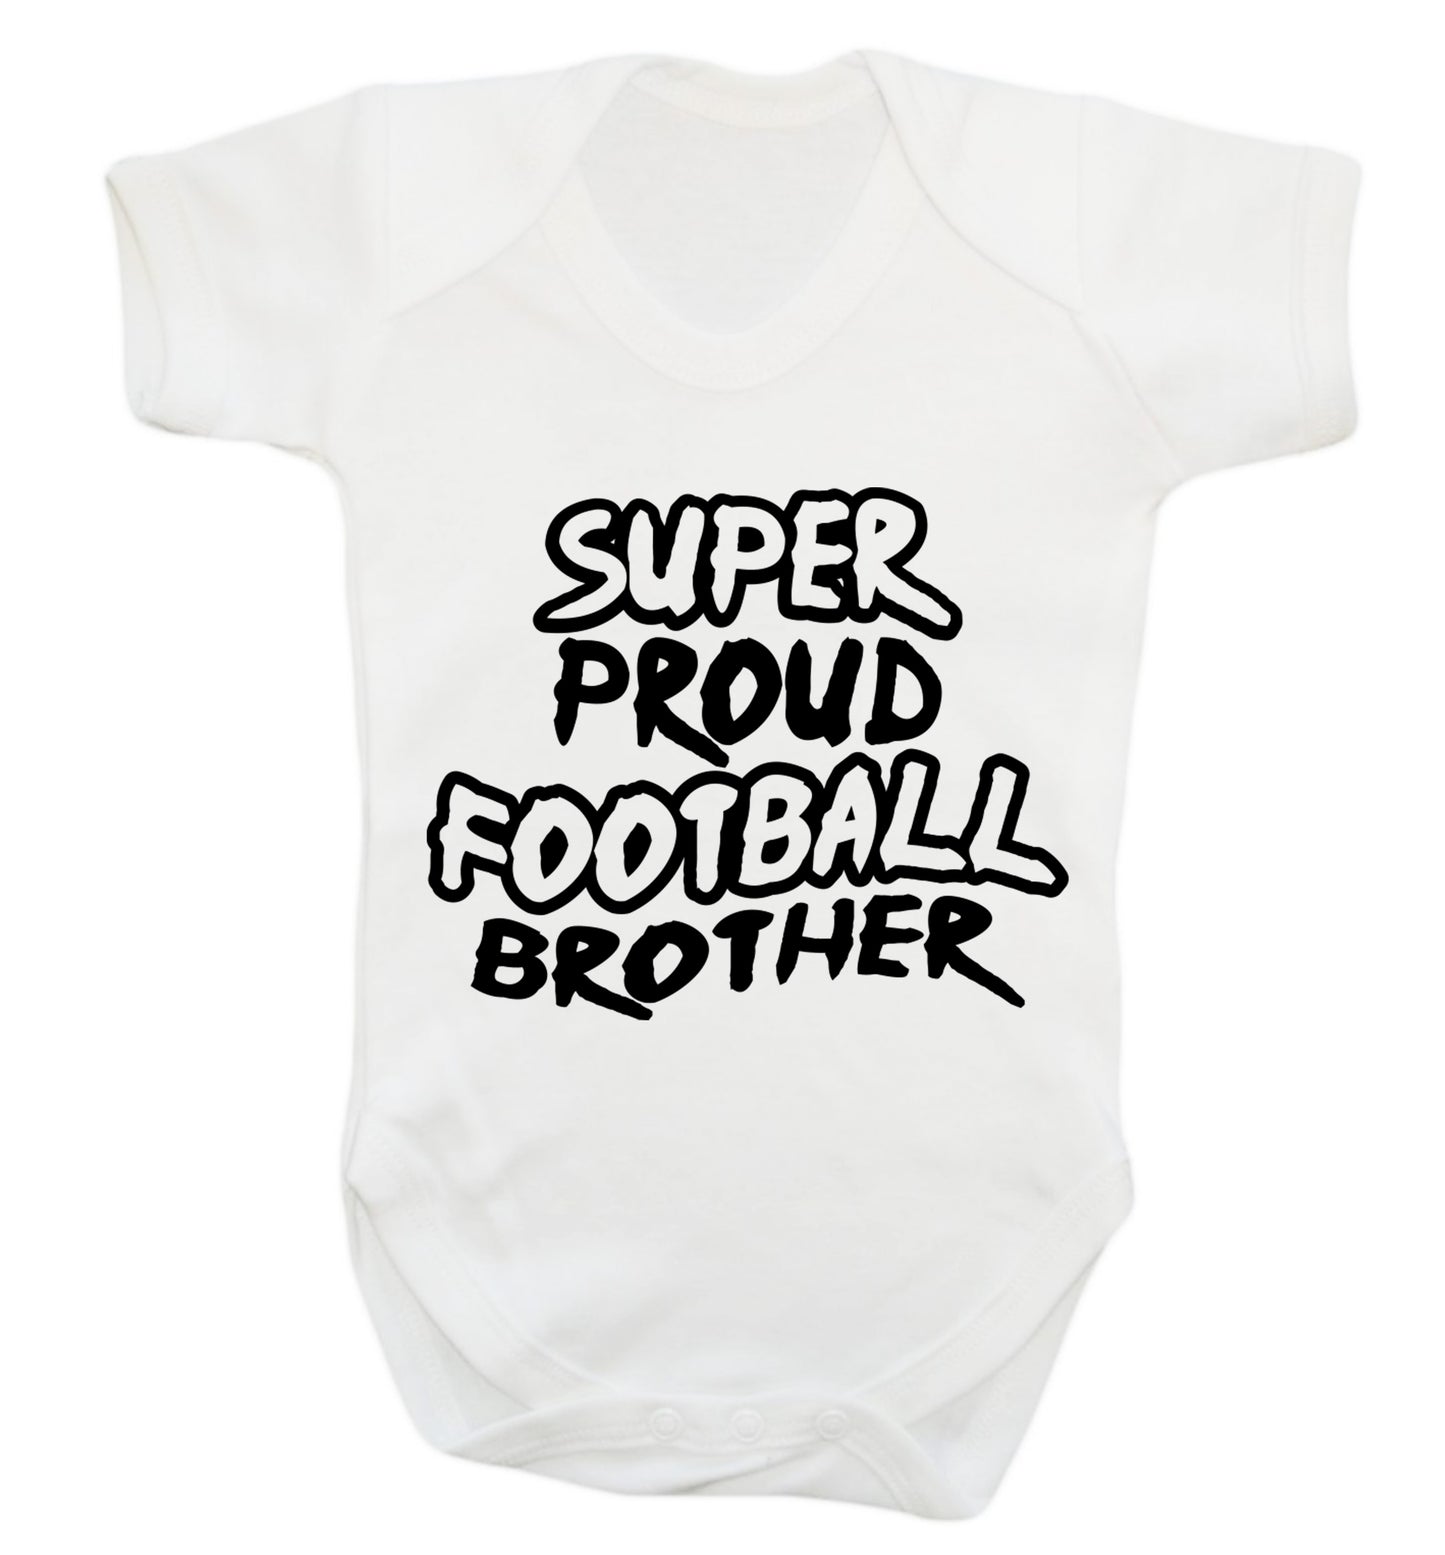 Super proud football brother Baby Vest white 18-24 months